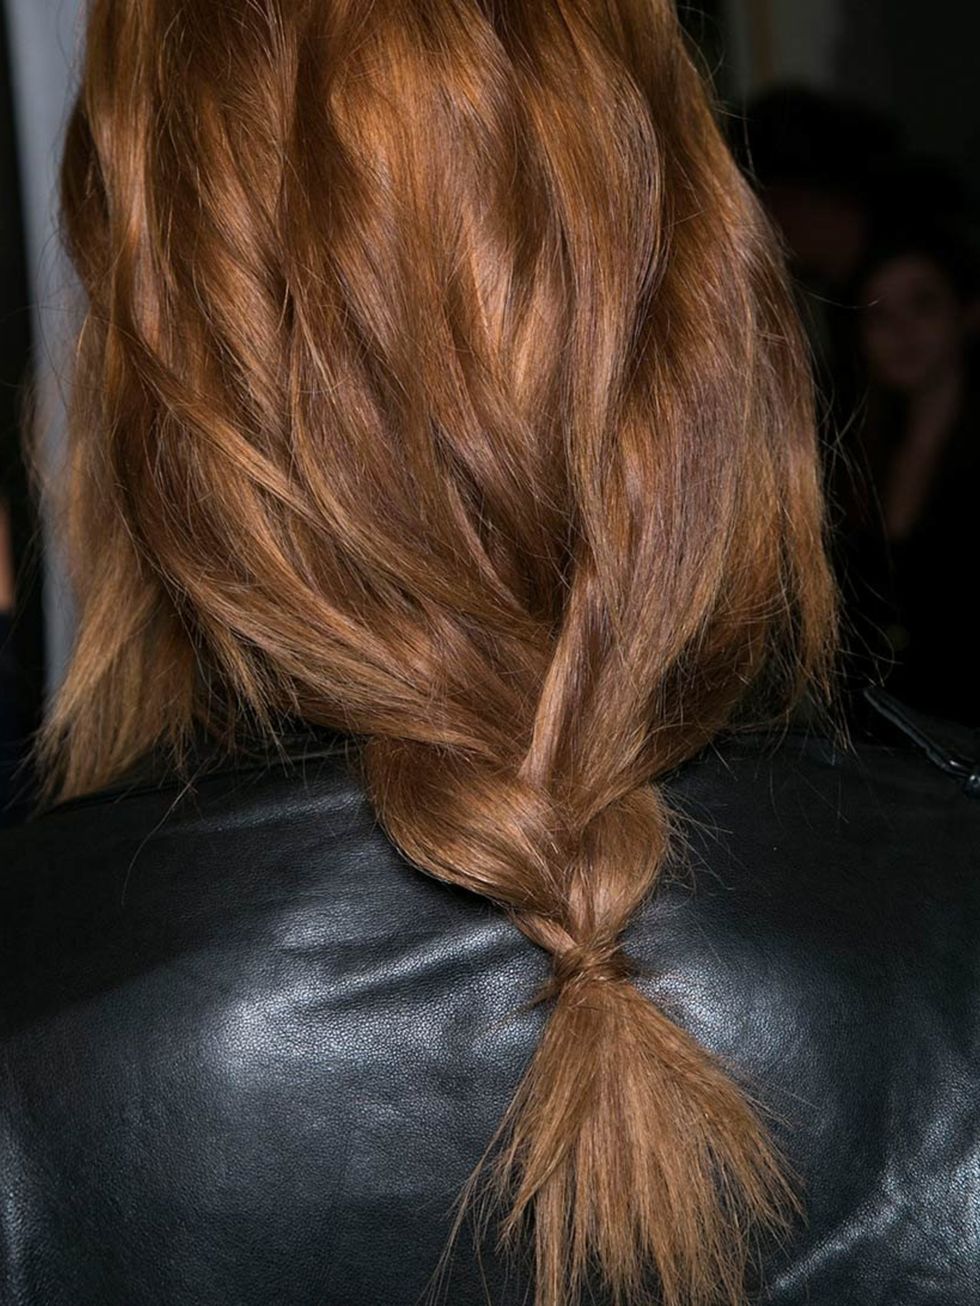 <p>Hair Stylist: Luigi Murenu</p><p>Look: Wispy Plait</p><p>Inspiration: The strong identity of the Pucci woman with a chic bohemian feel.</p><p>Key Product: <a href="http://www.lookfantastic.com/k-rastase-styling-mousse-bouffant-150ml/10802598.html?utm_s